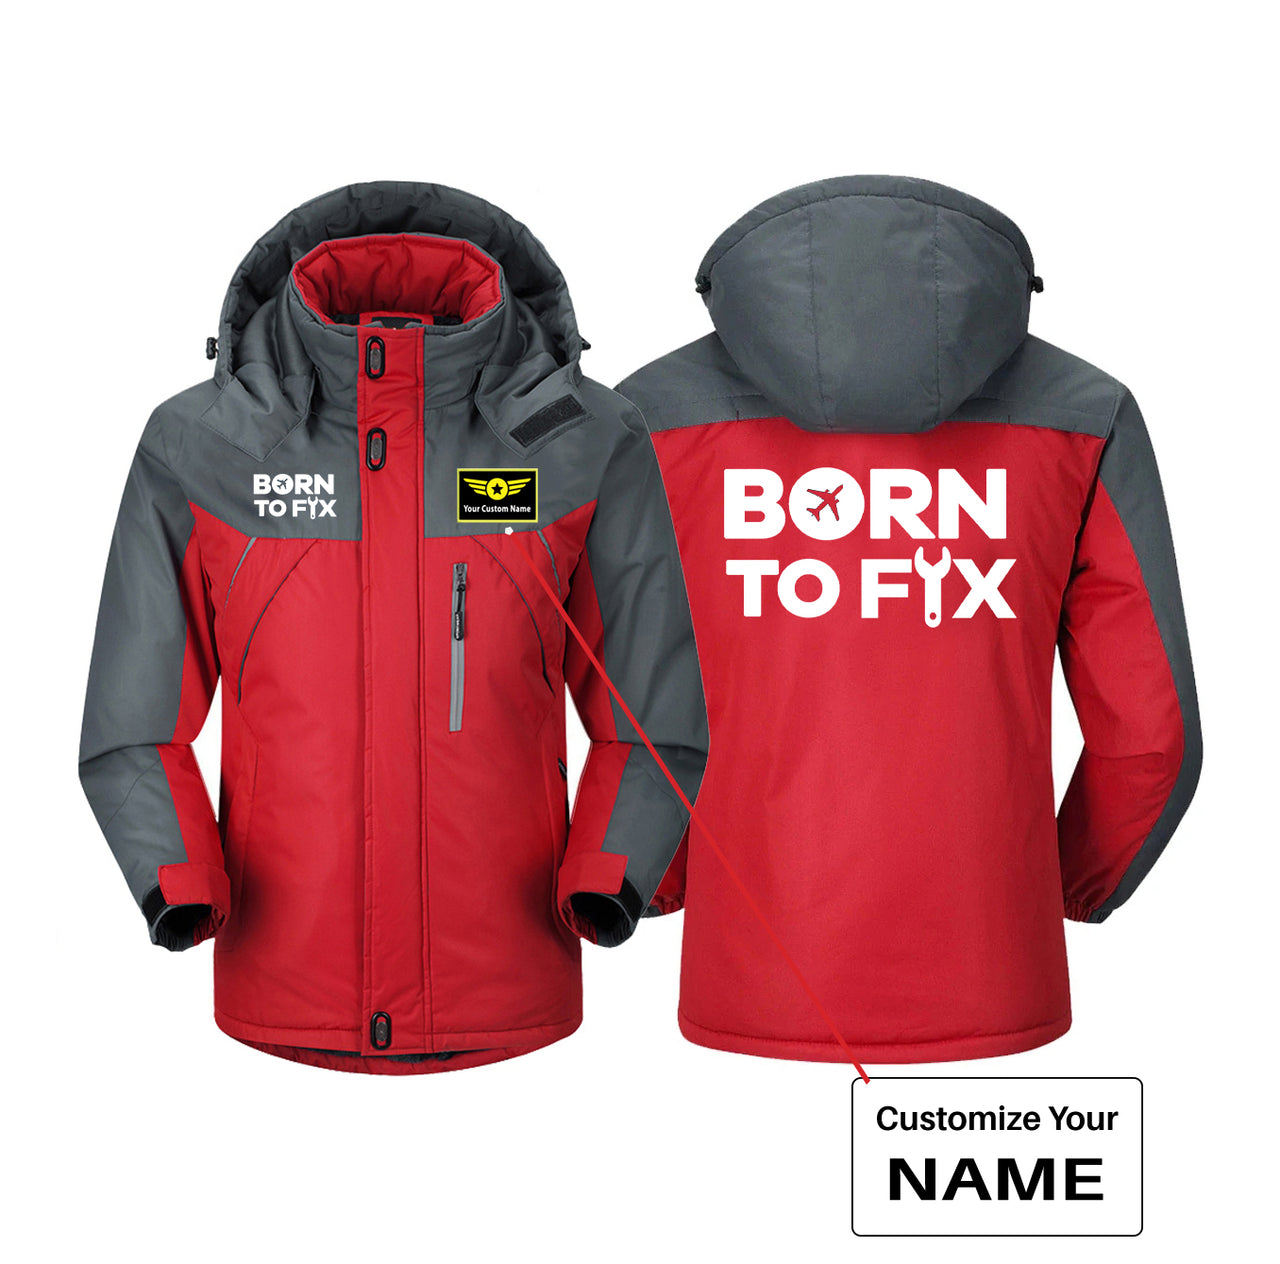 Born To Fix Airplanes Designed Thick Winter Jackets